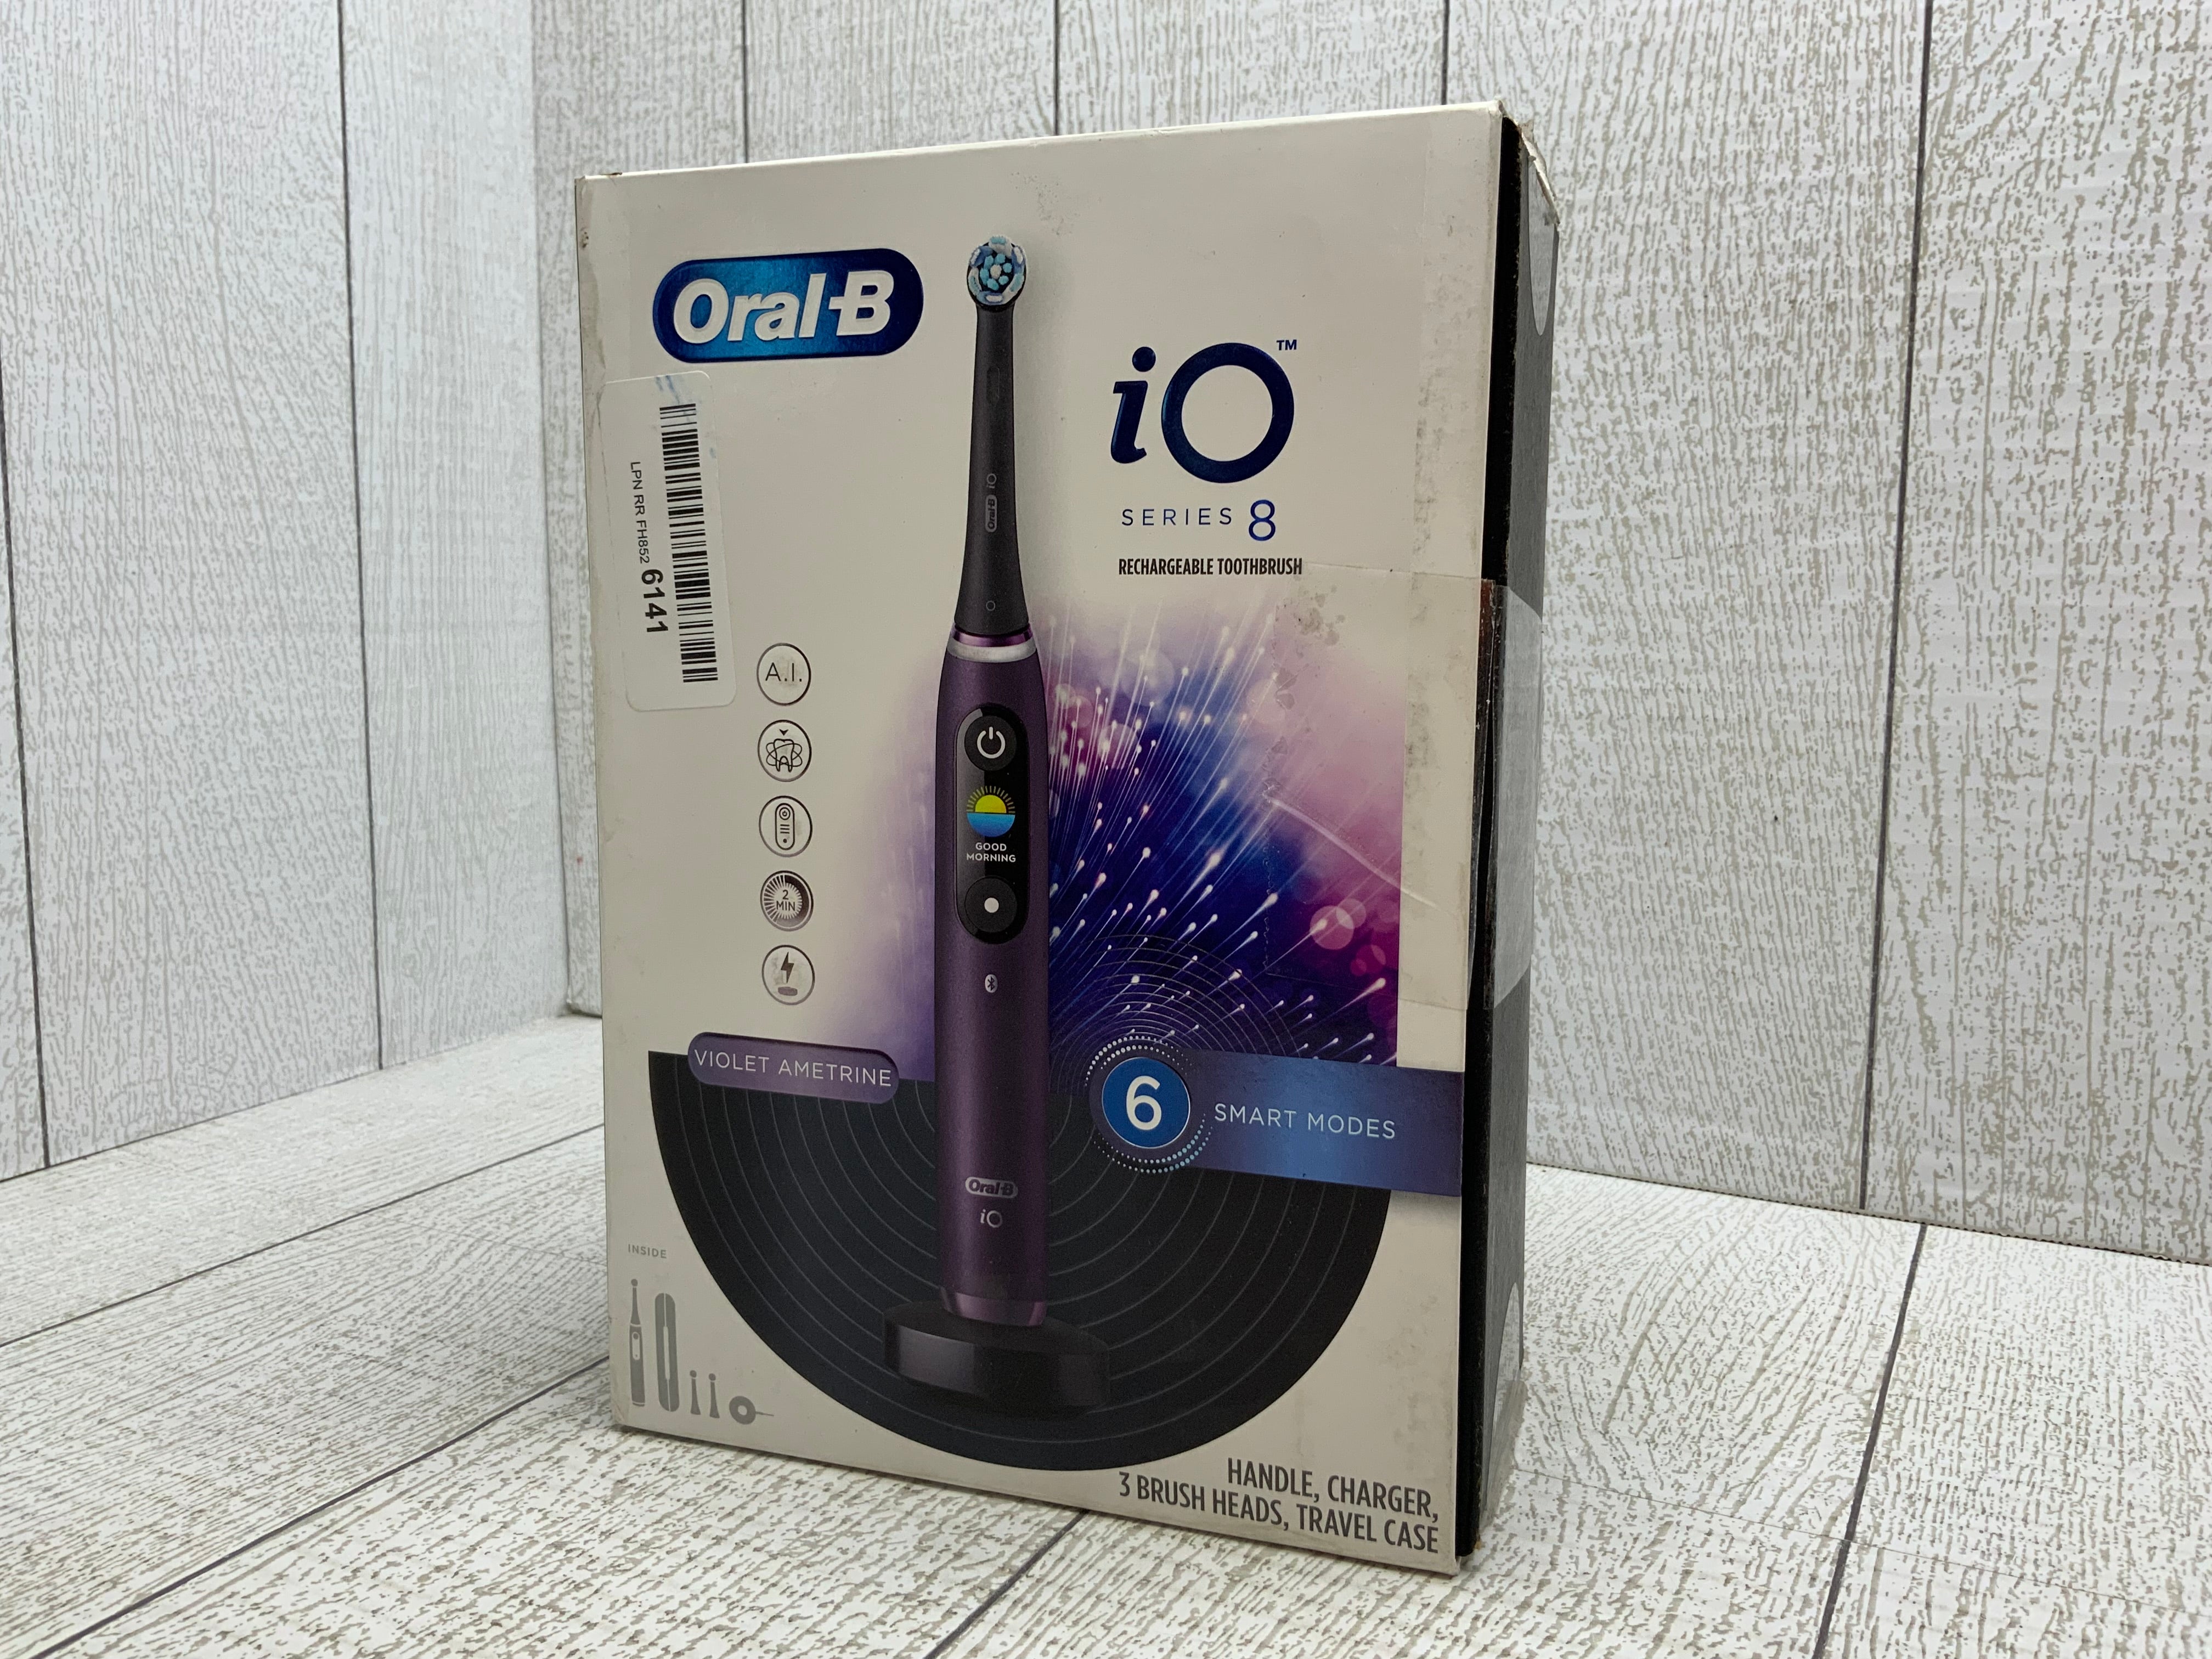 Oral-B iO Series 8 Electric Toothbrush with 2 Replacement Brush Heads, Violet Ametrine (8050792104174)